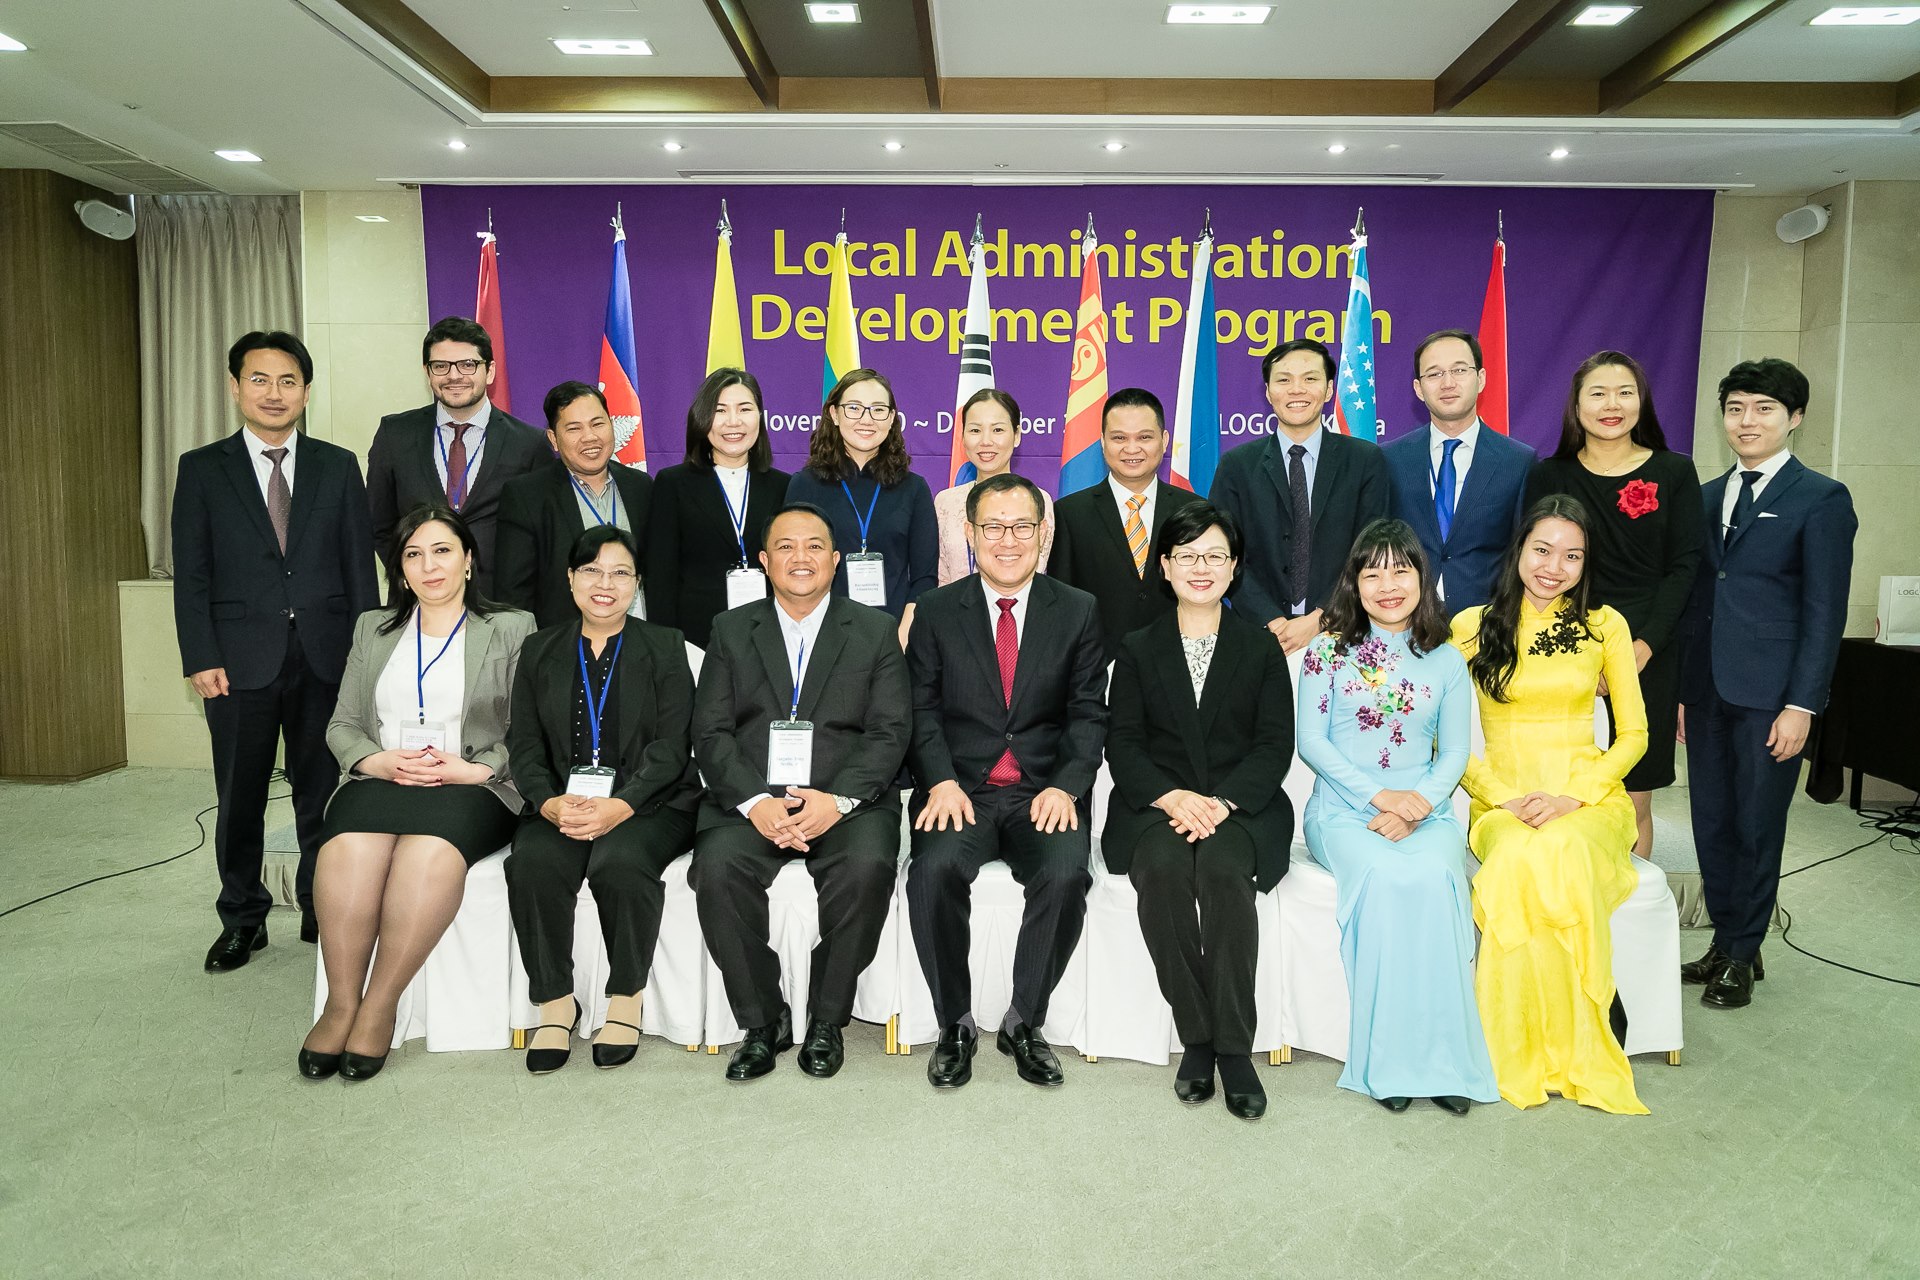 LOGODI takes in 13 officials from 8 countries to develop local administration 큰 이미지[마우스 클릭 시 창닫기]